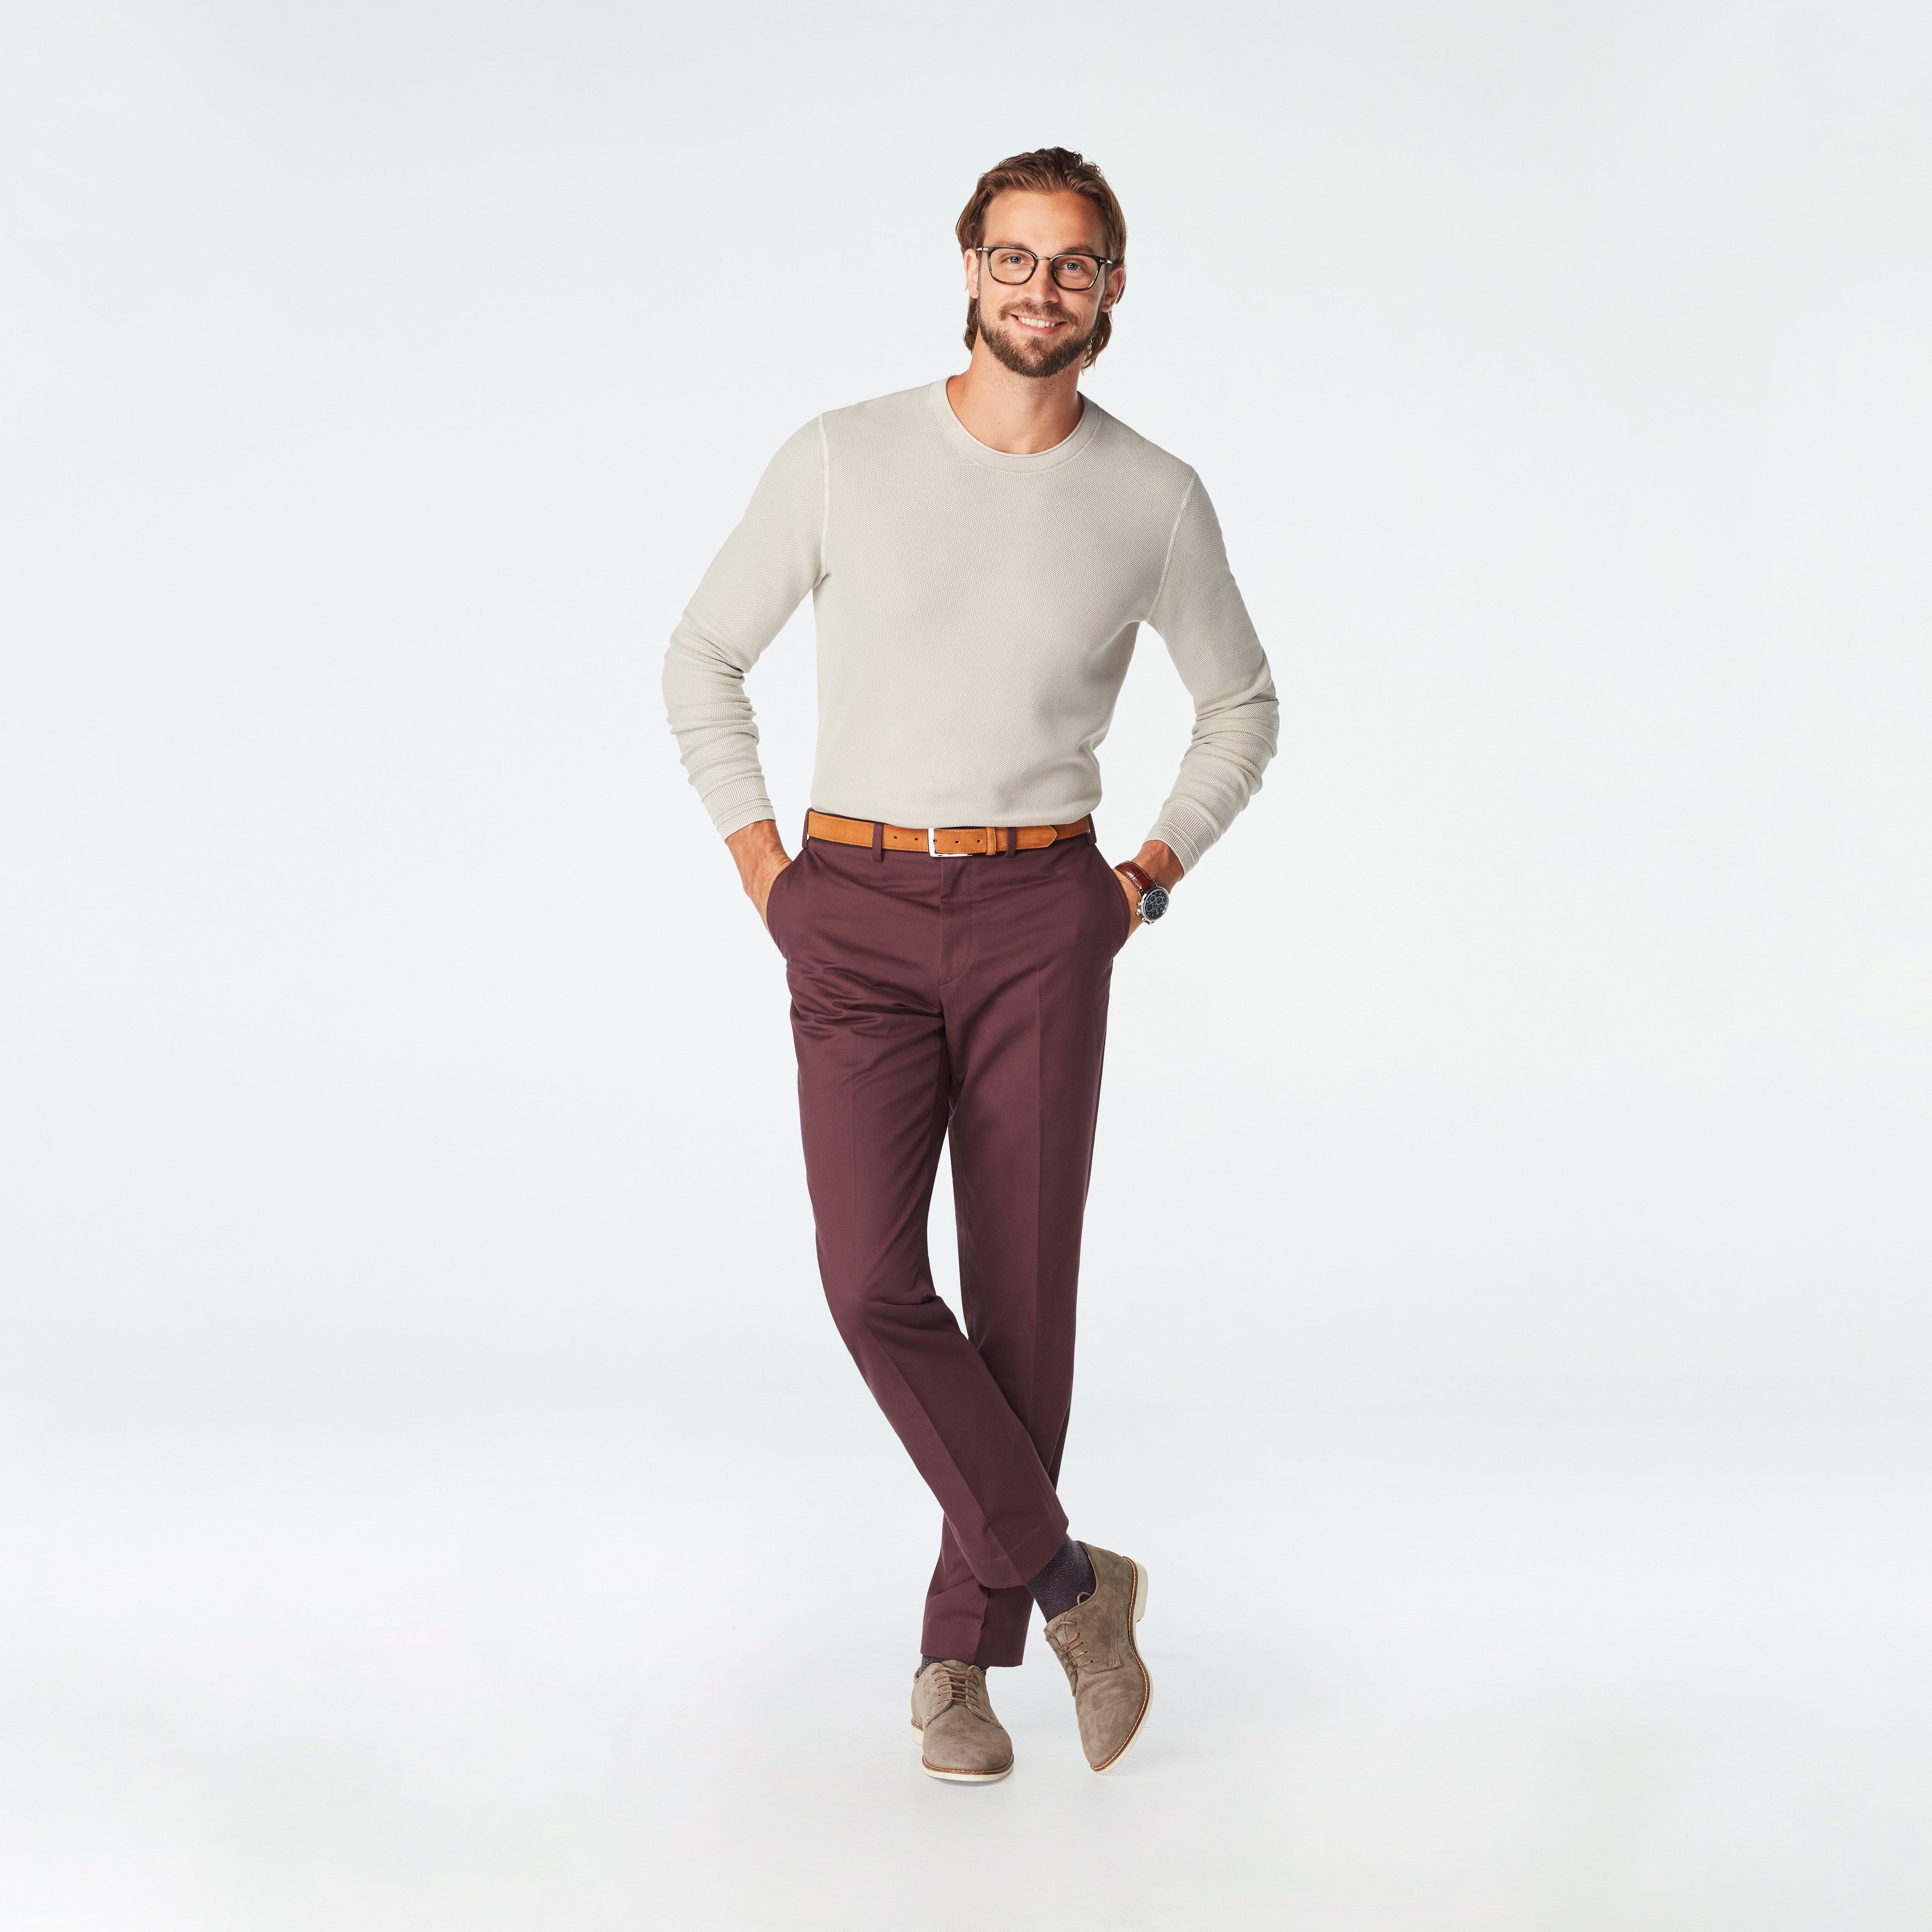 8 Ways to Rock Your Burgundy Pants (Outfit & Style Ideas)